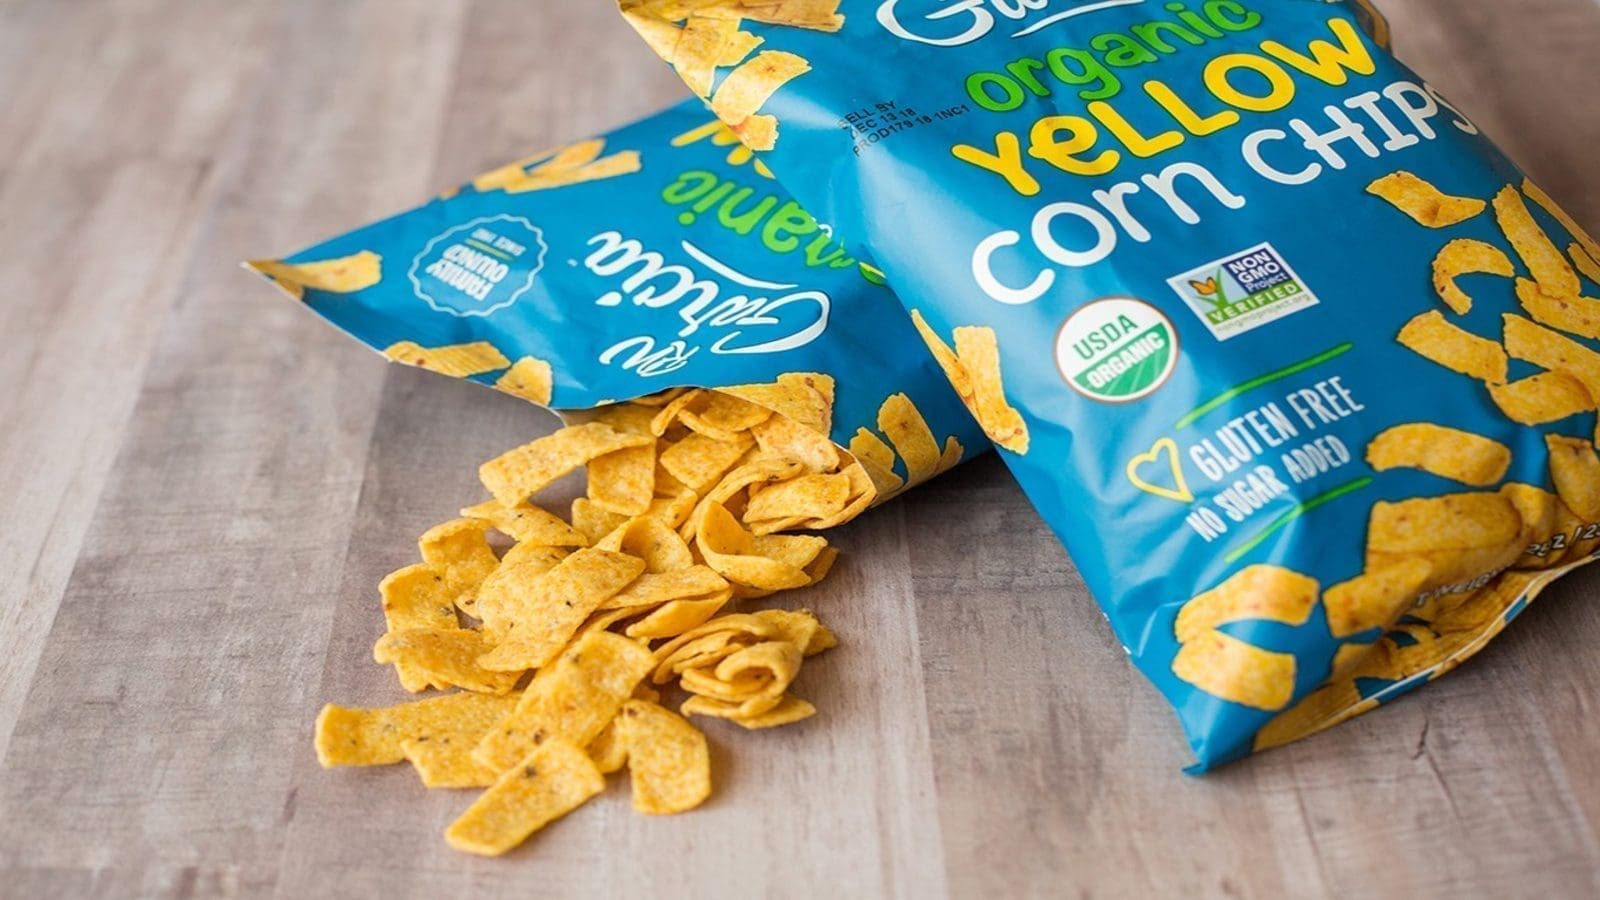 Utz Brands expands snack portfolio with acquisition of  tortilla chips maker RW Garcia